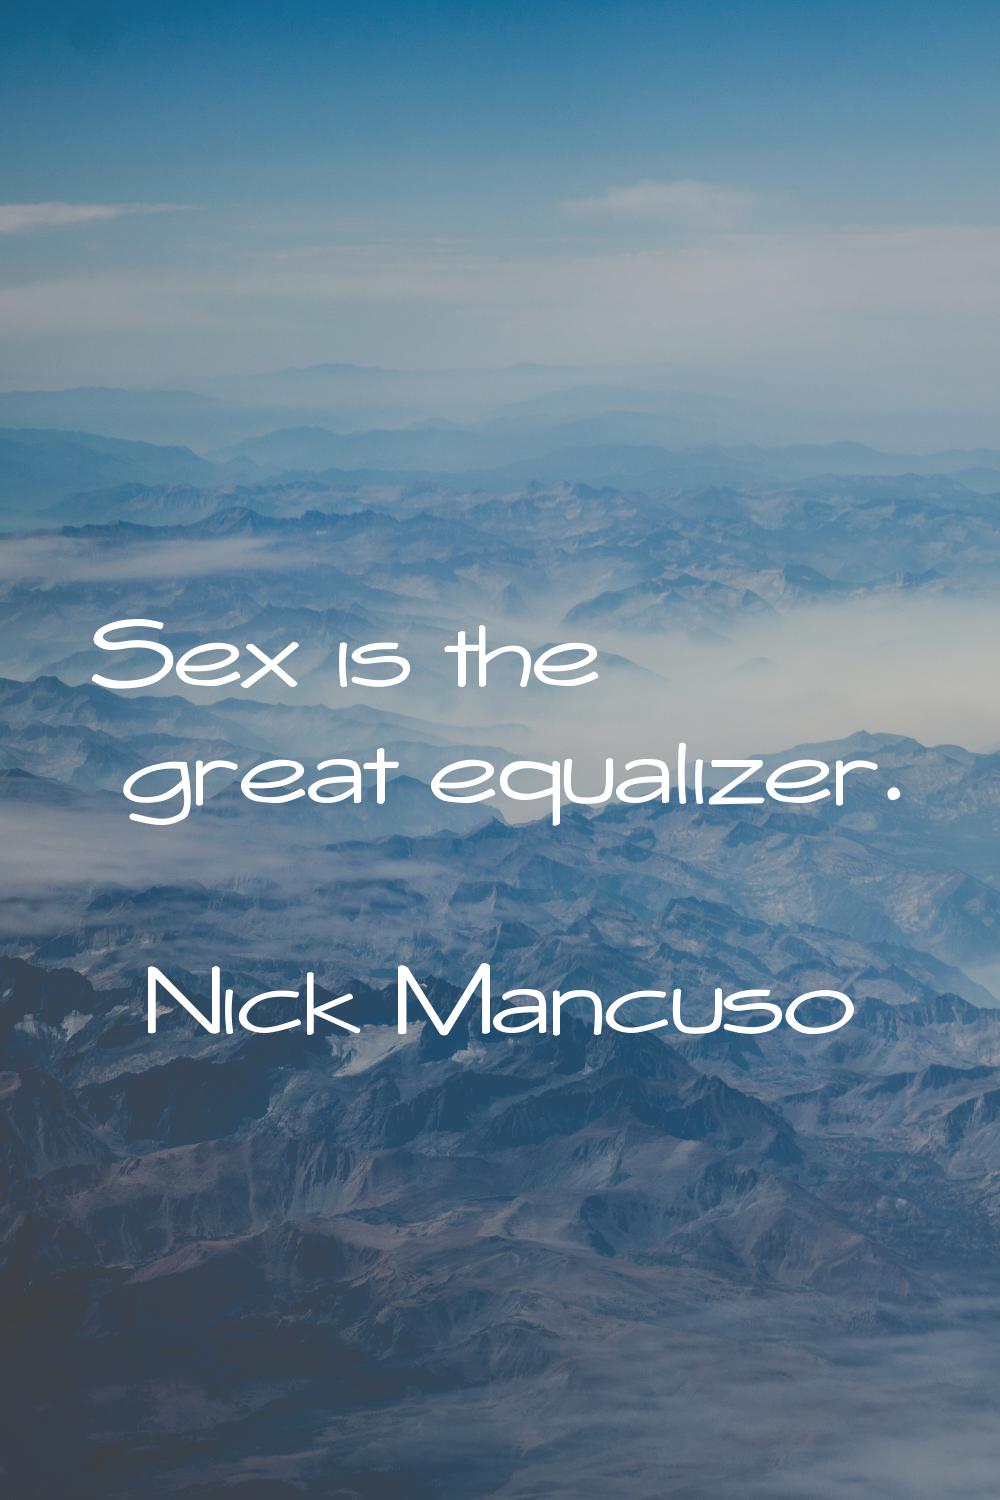 Sex is the great equalizer.